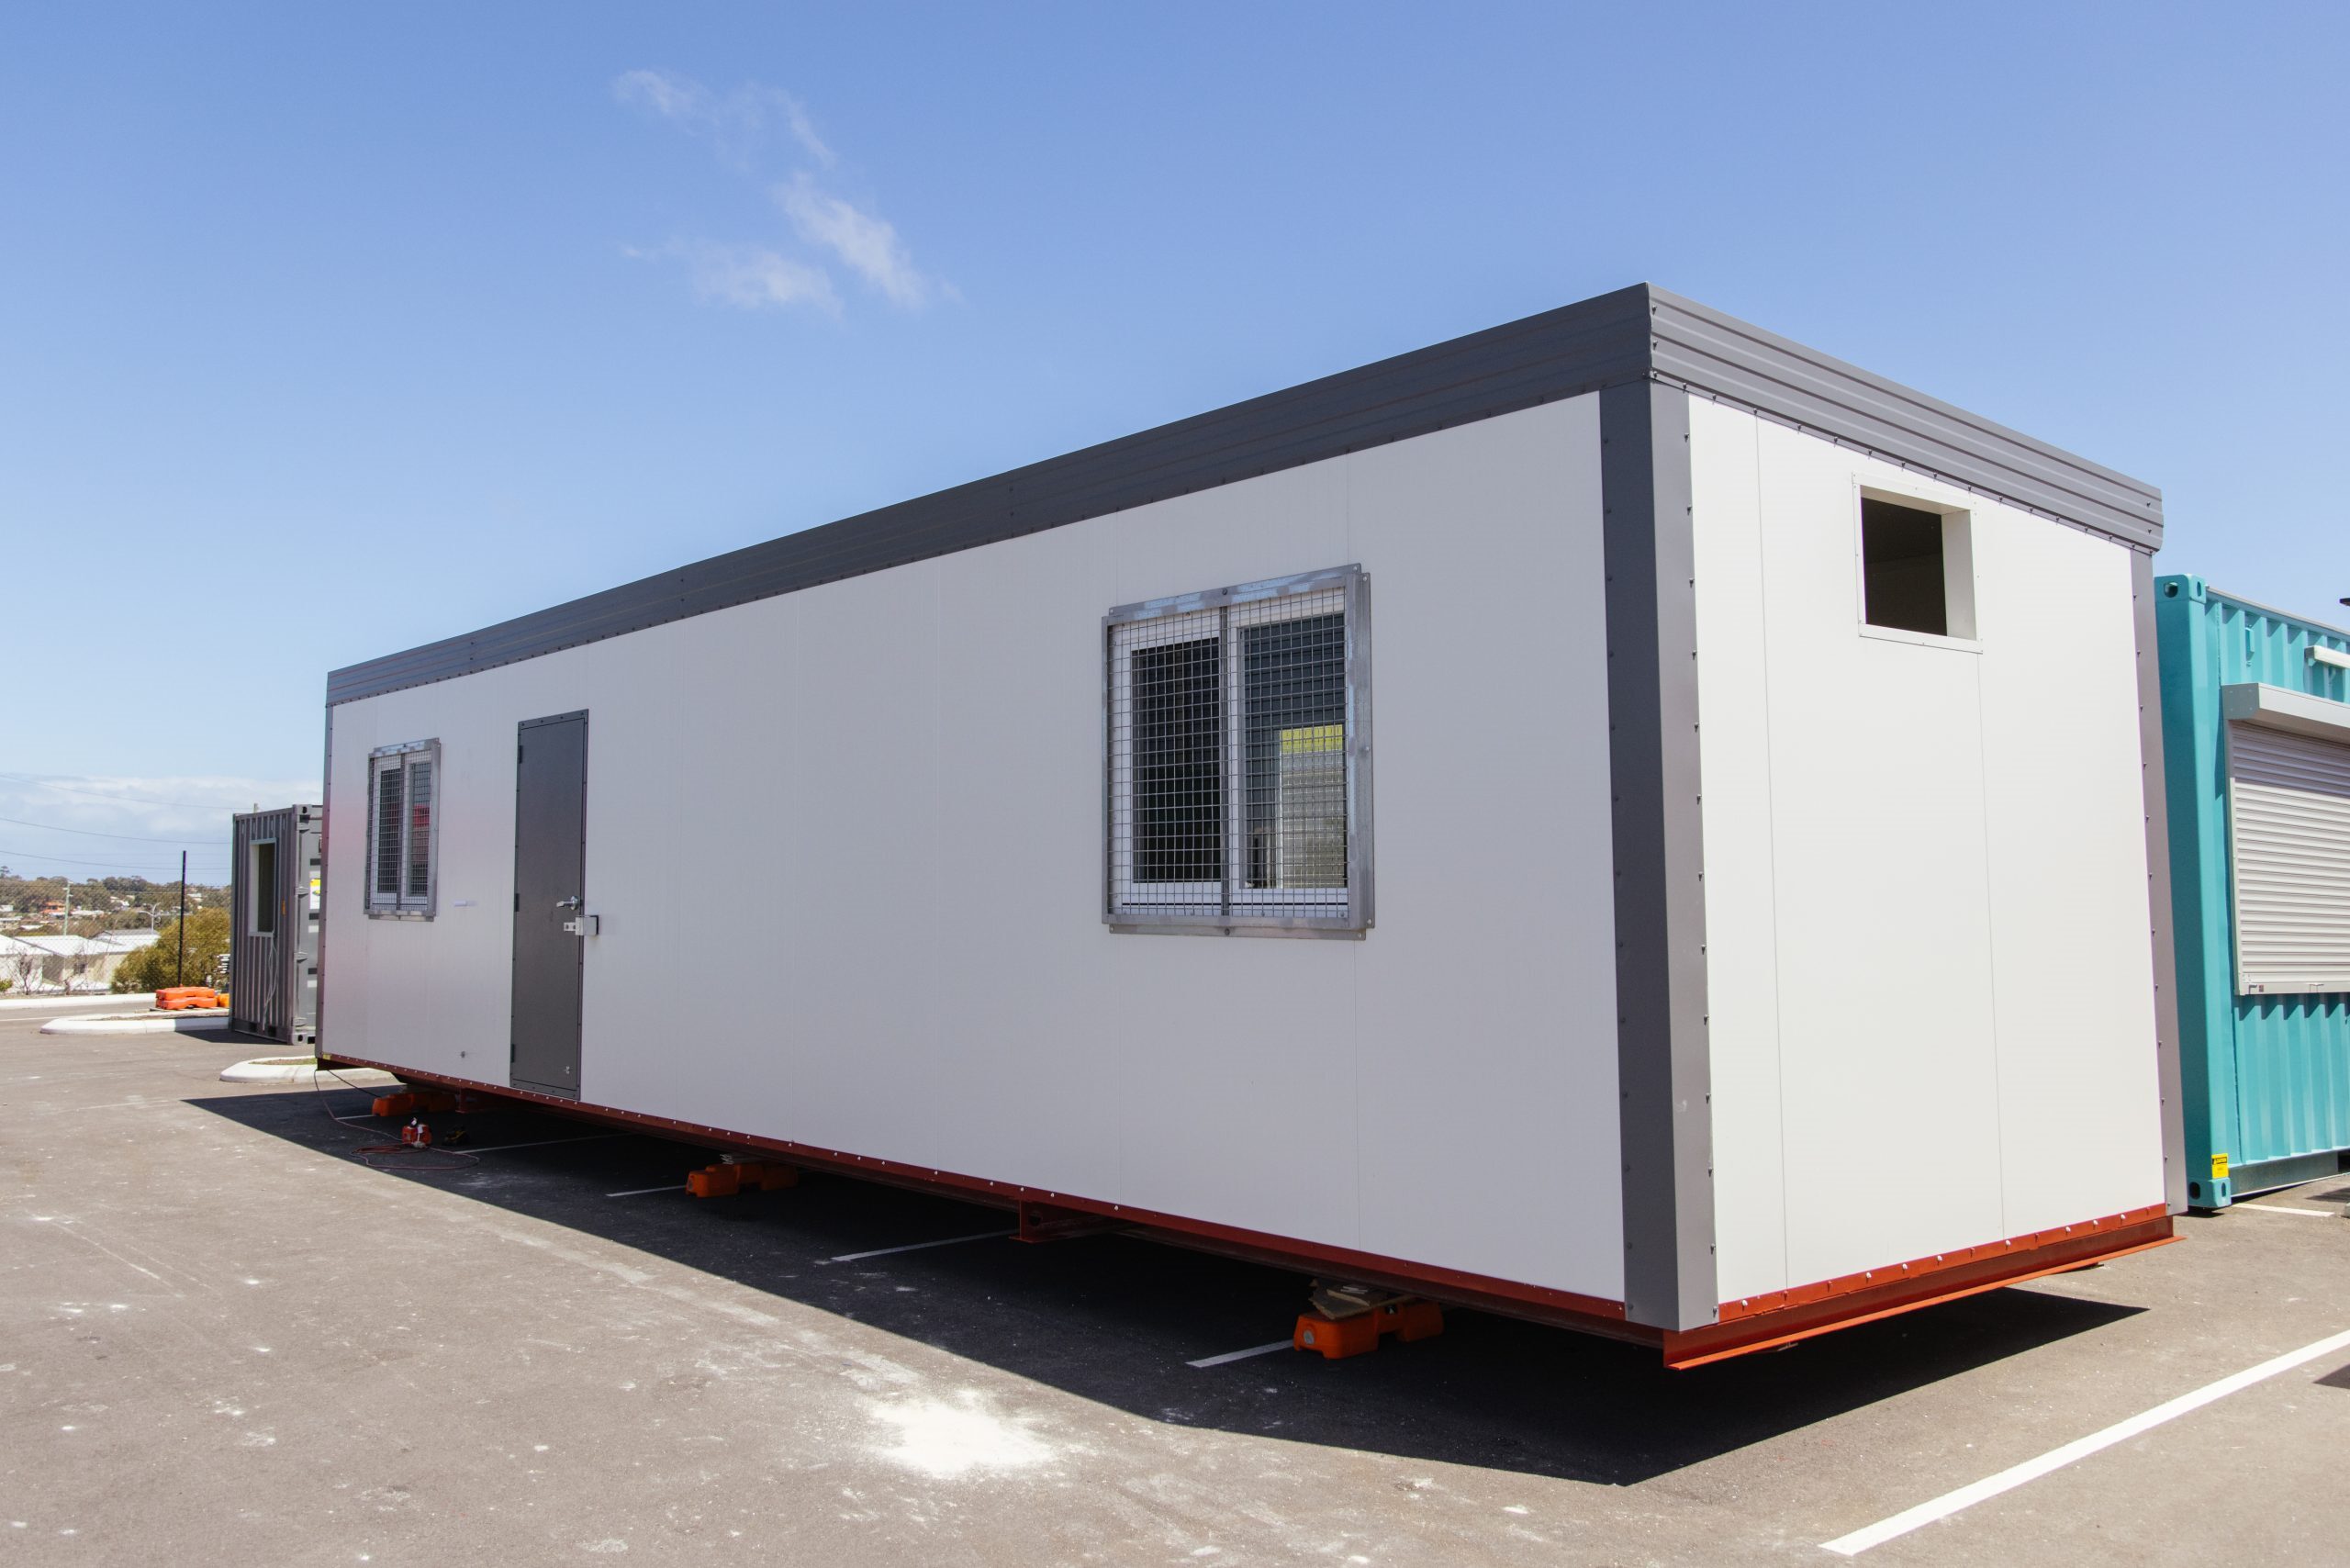 Modern portable office container with security window grills, parked on an outdoor lot under blue sky.